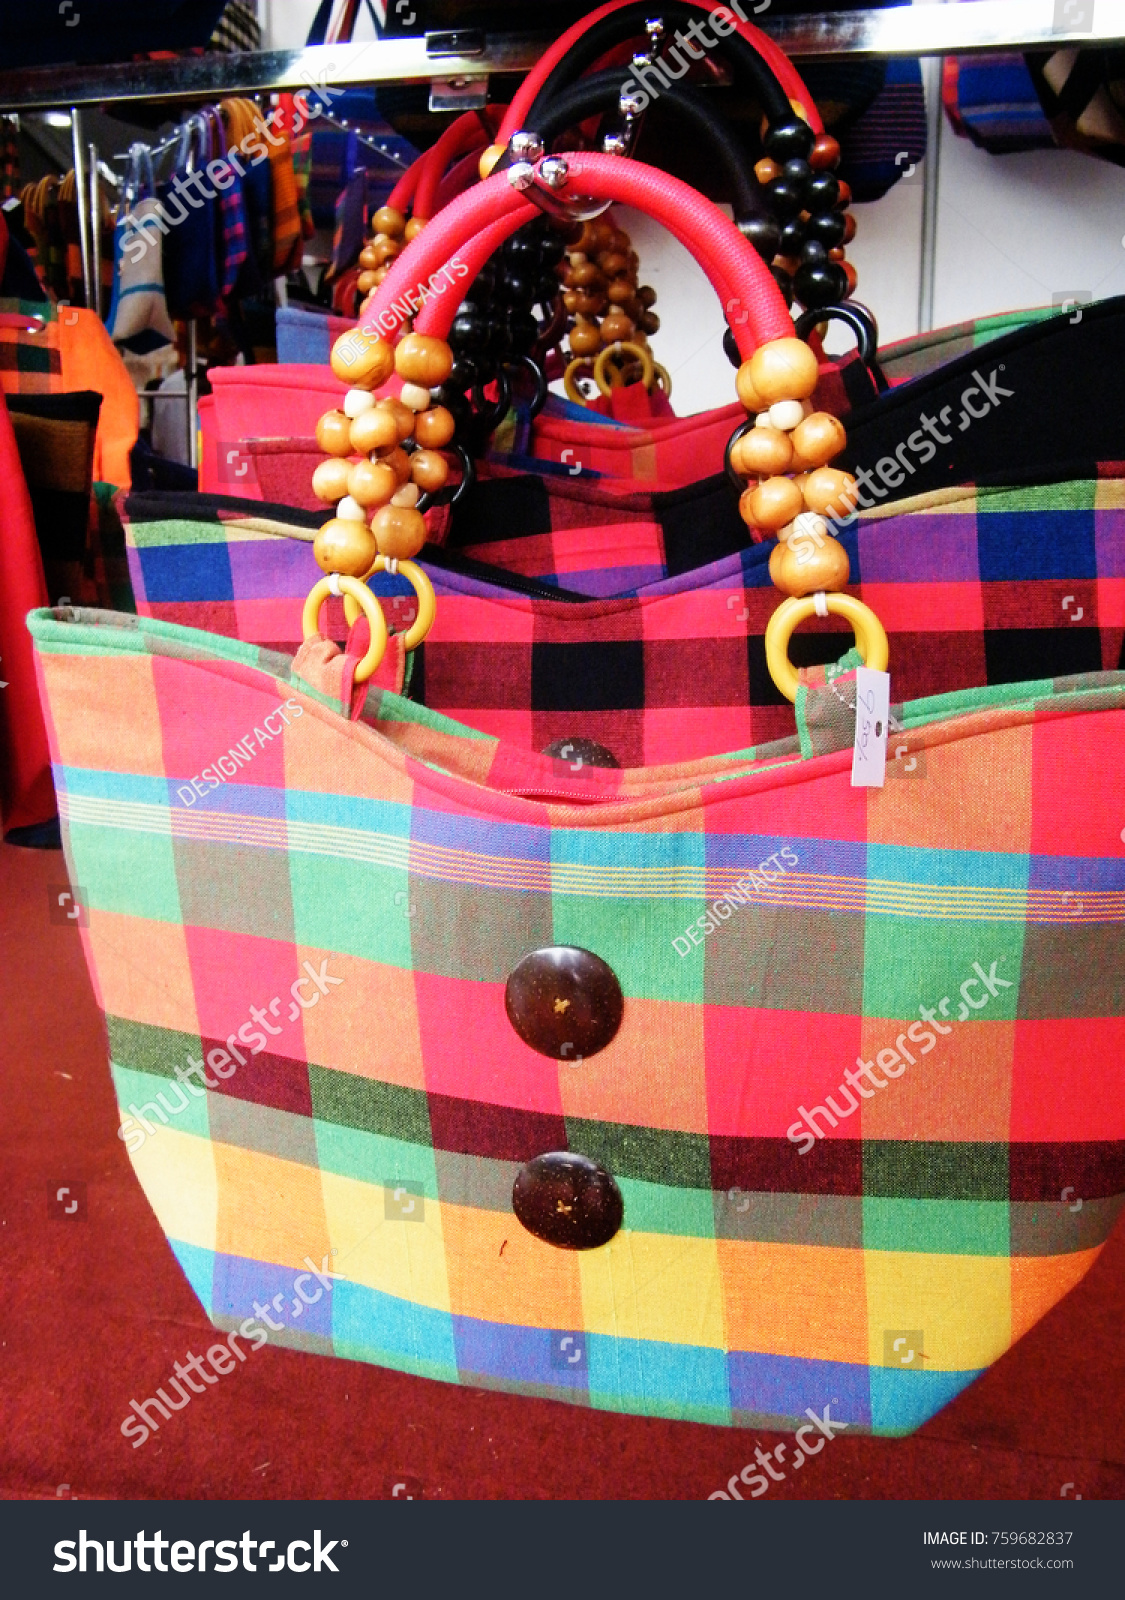 Textile bag in Sri Lanka.Hand Beach bag isolated.Hand loom work in Sri Lanka.Tourism industry and bag.Linen Color bag for sell.Art and craft items.Handicraft items. #759682837